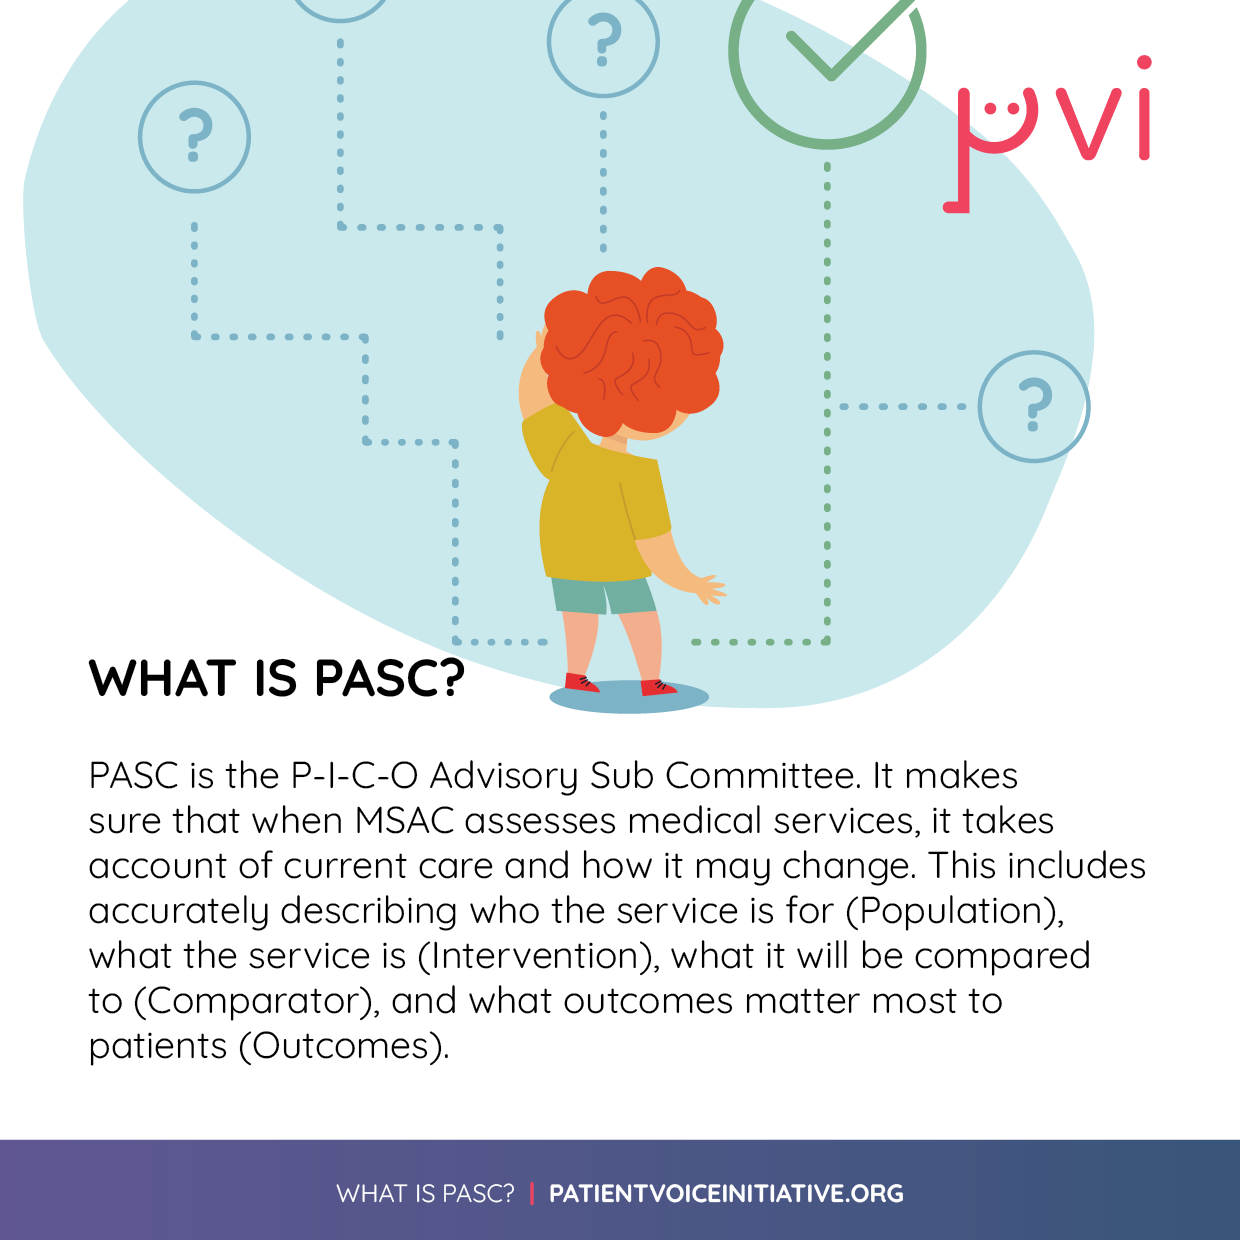 What is PASC